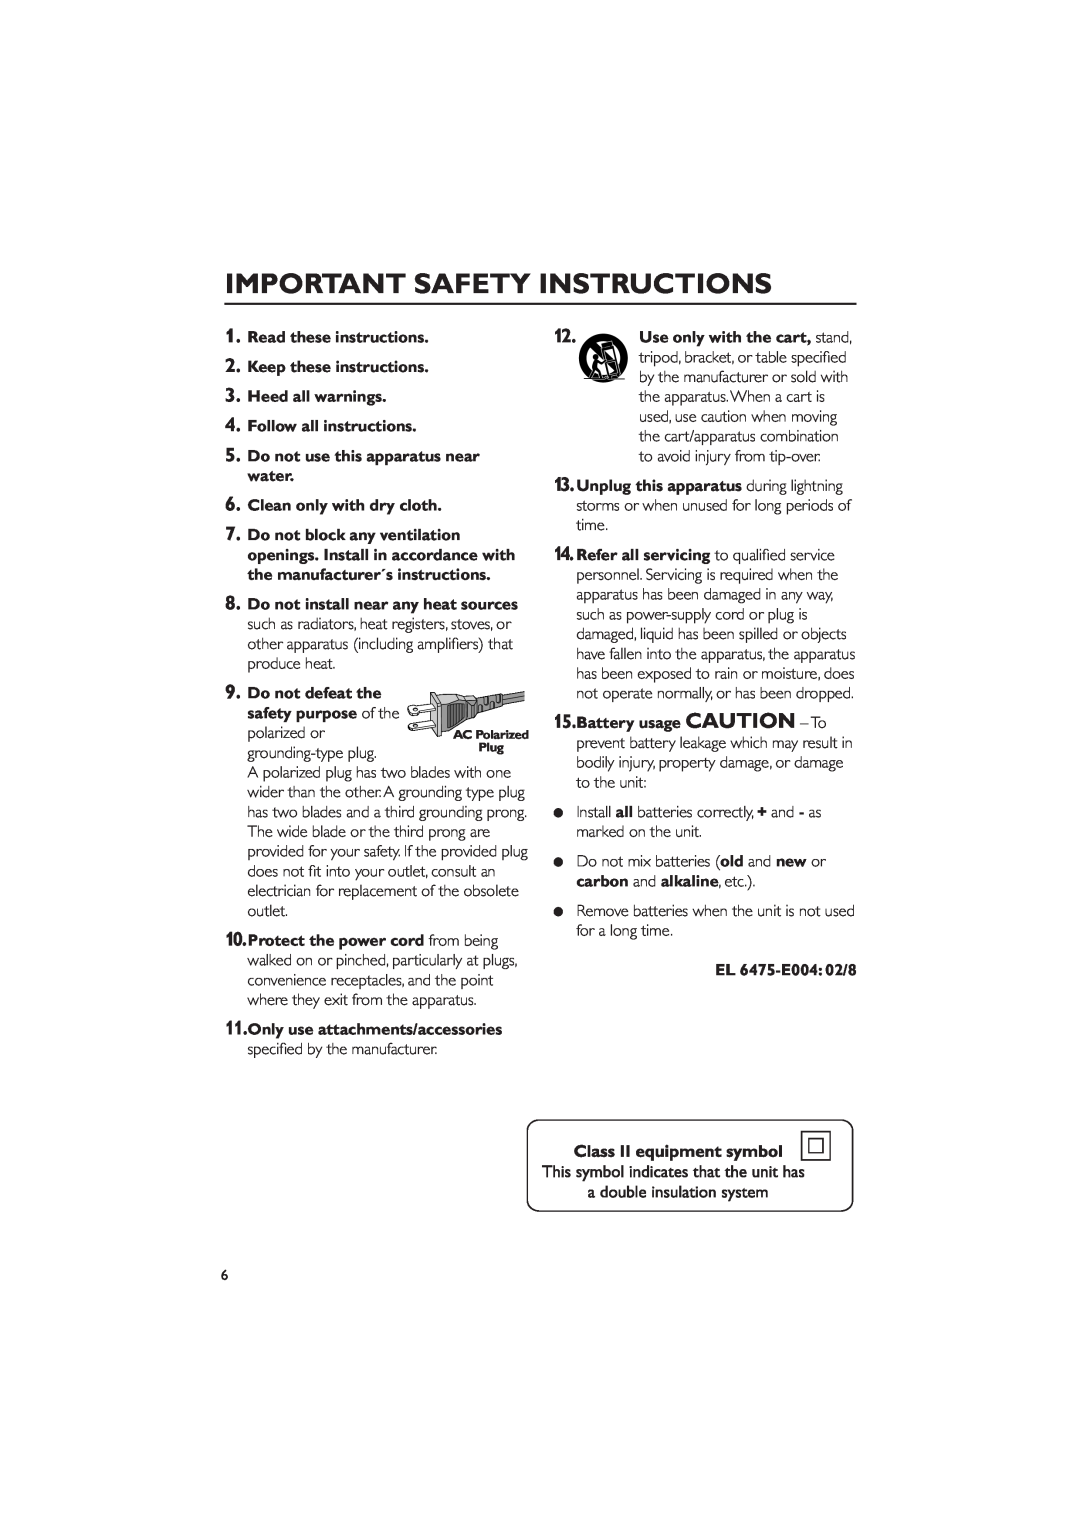 Philips MC-130 warranty Important Safety Instructions 